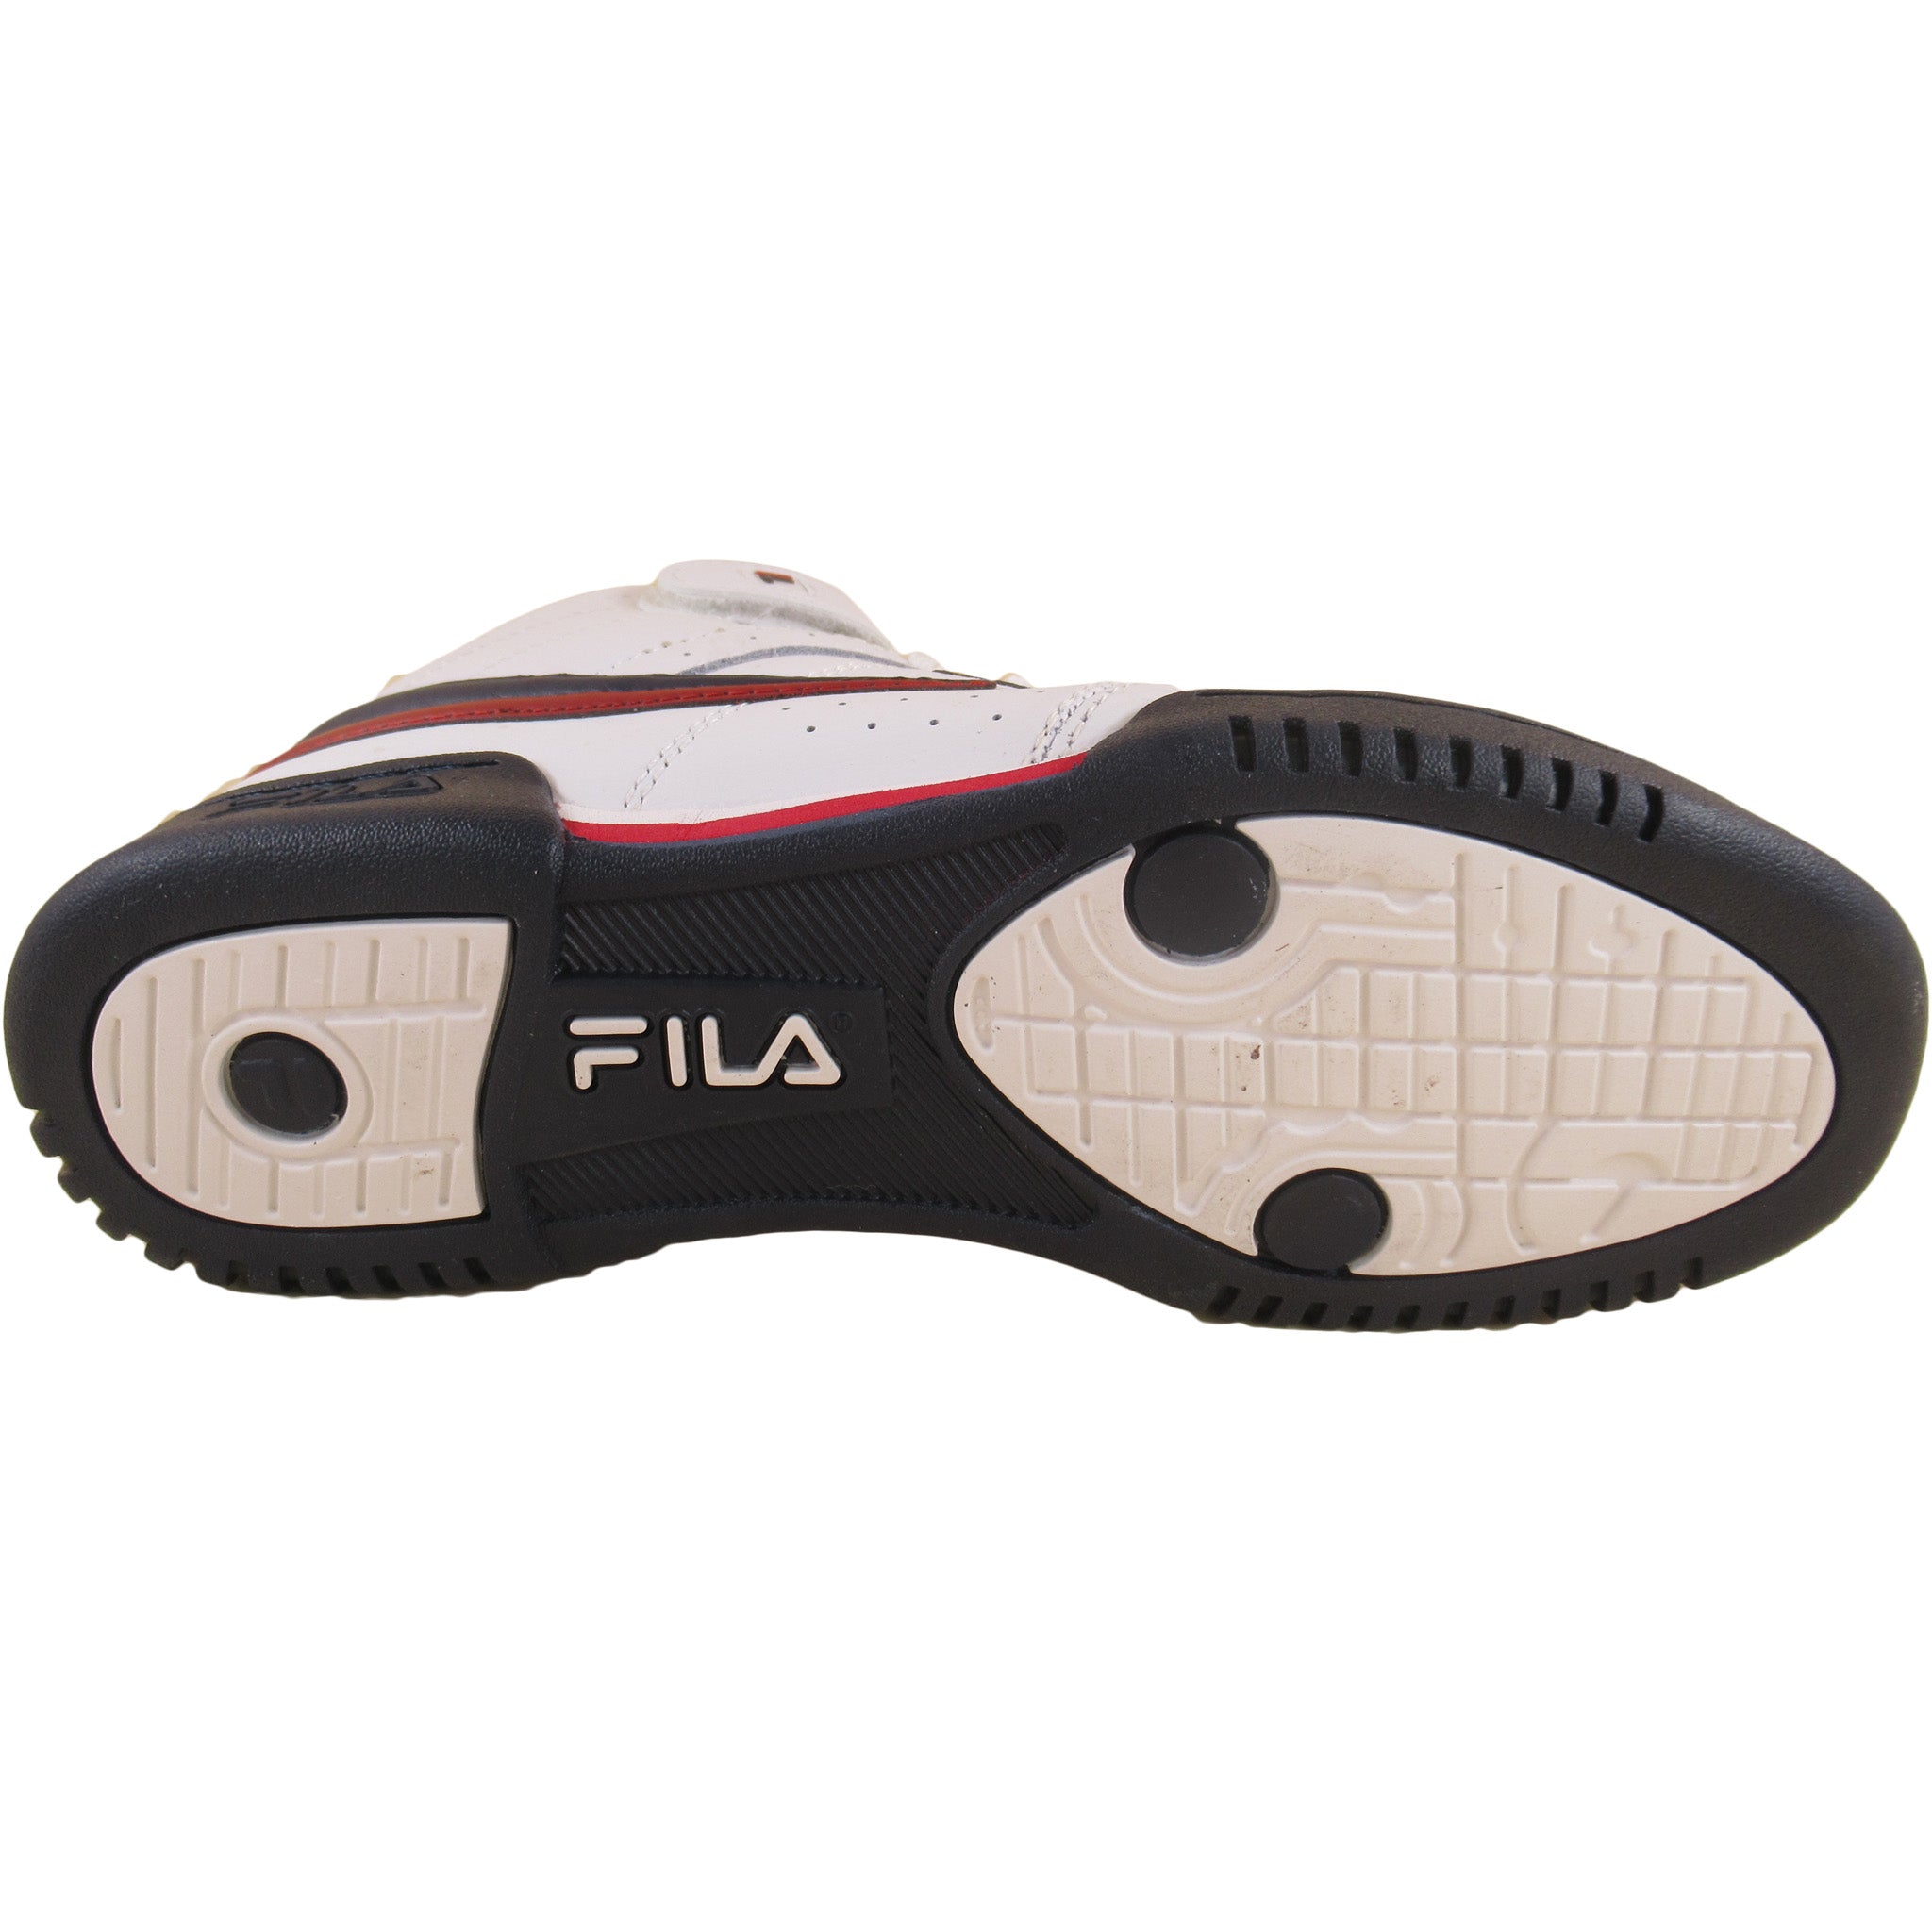 Fila Kids F-13 Grade-School – Navy White Store That Shoes Shoe More Red Athletic and Casual